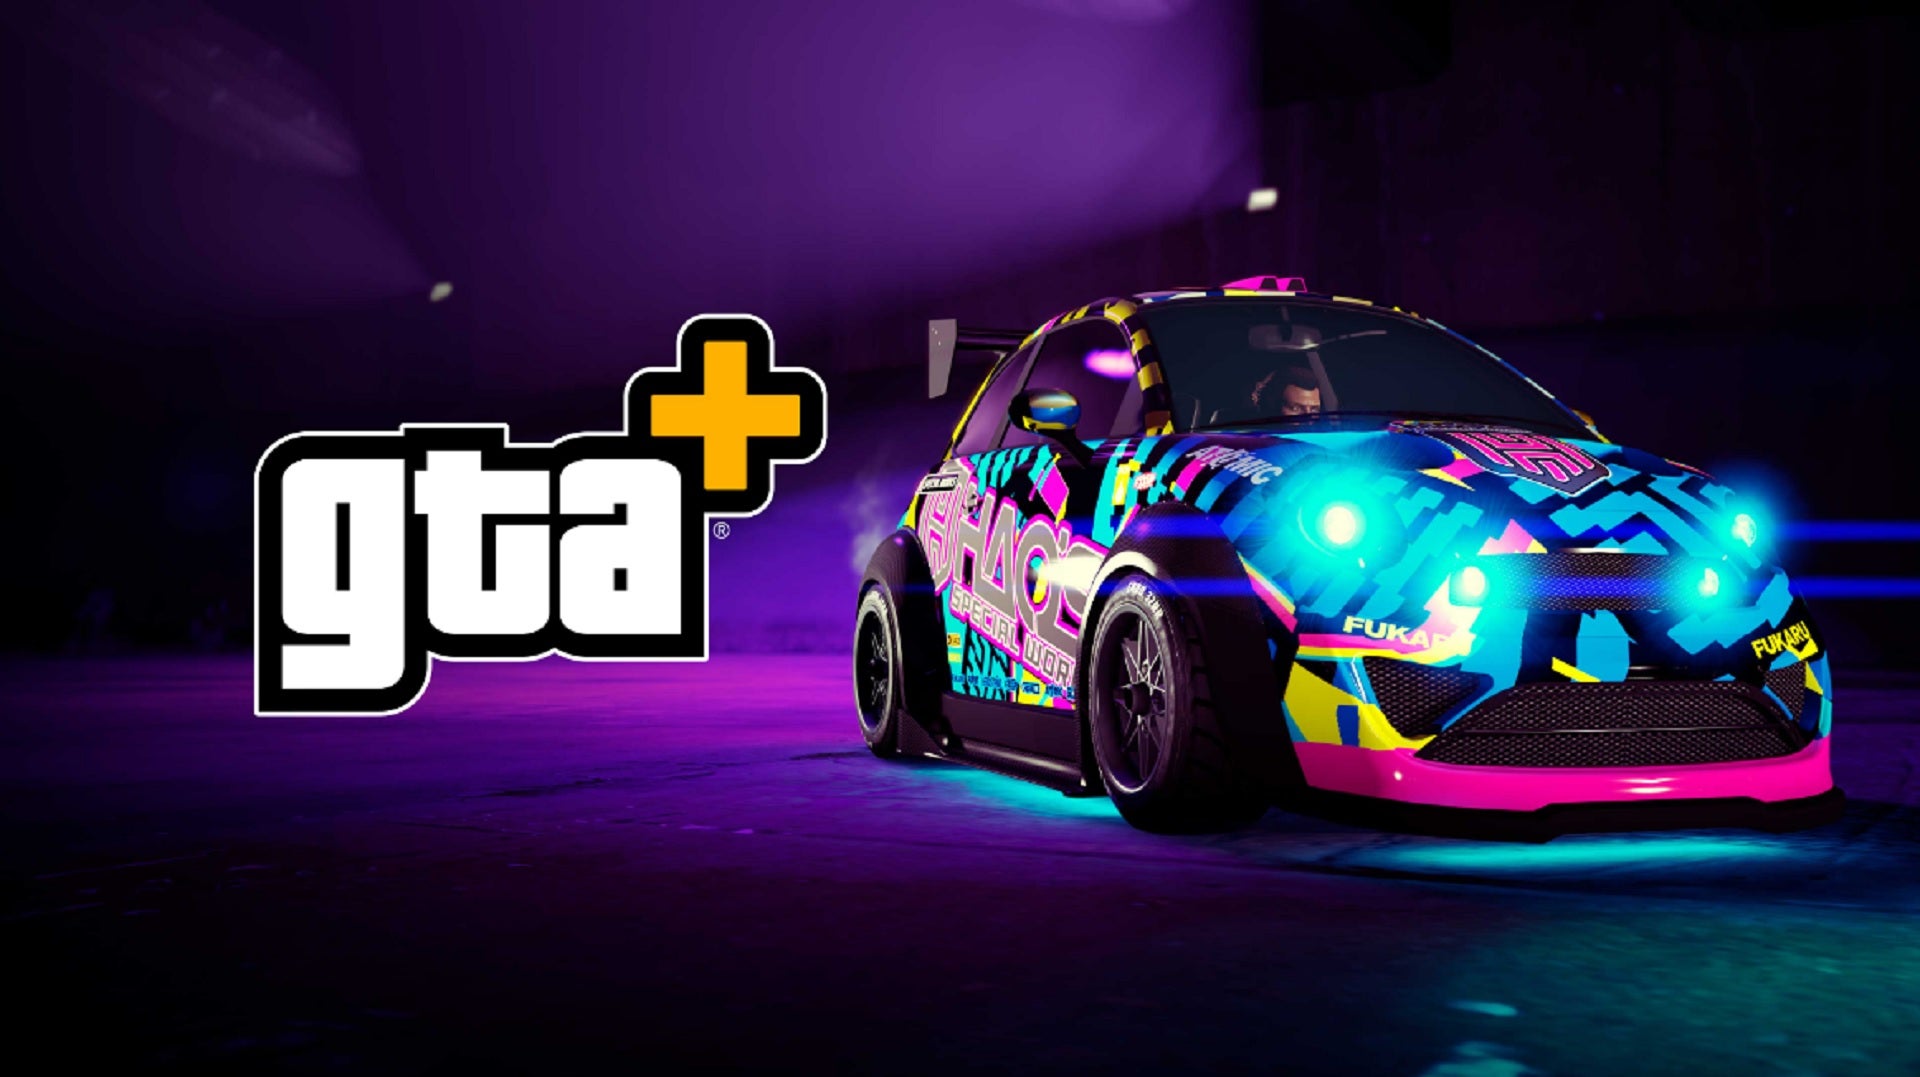 Header for GTA+ May 2022. With a decal-covered car on the front.